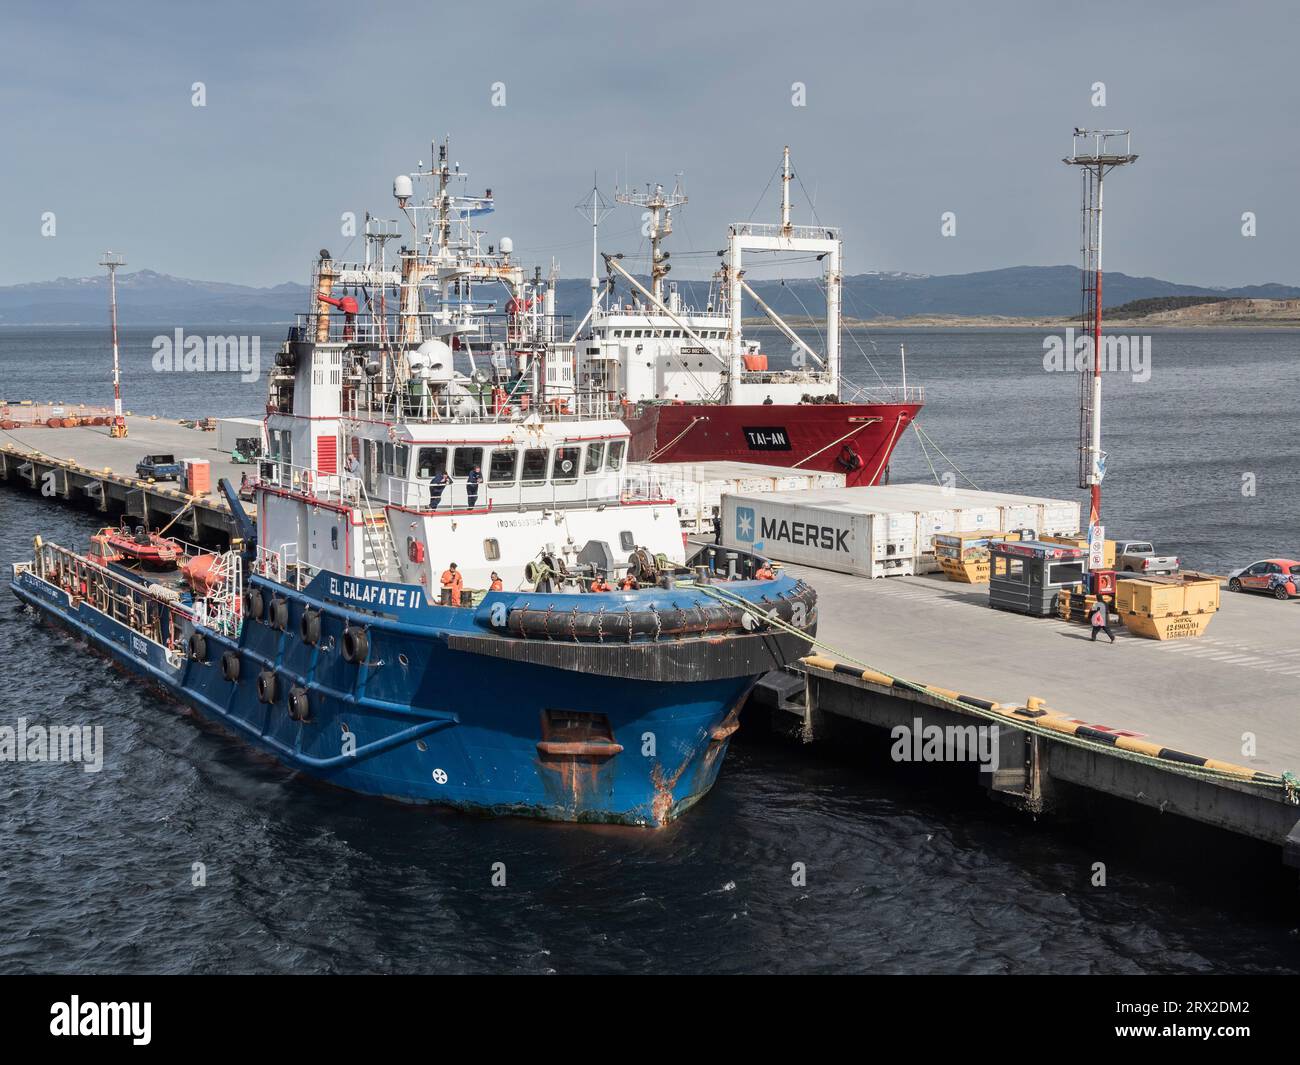 A view of the commercial dock in Ushuaia in the Beagle Channel, Ushuaia, Tierra del Fuego, Argentina, South America Stock Photo